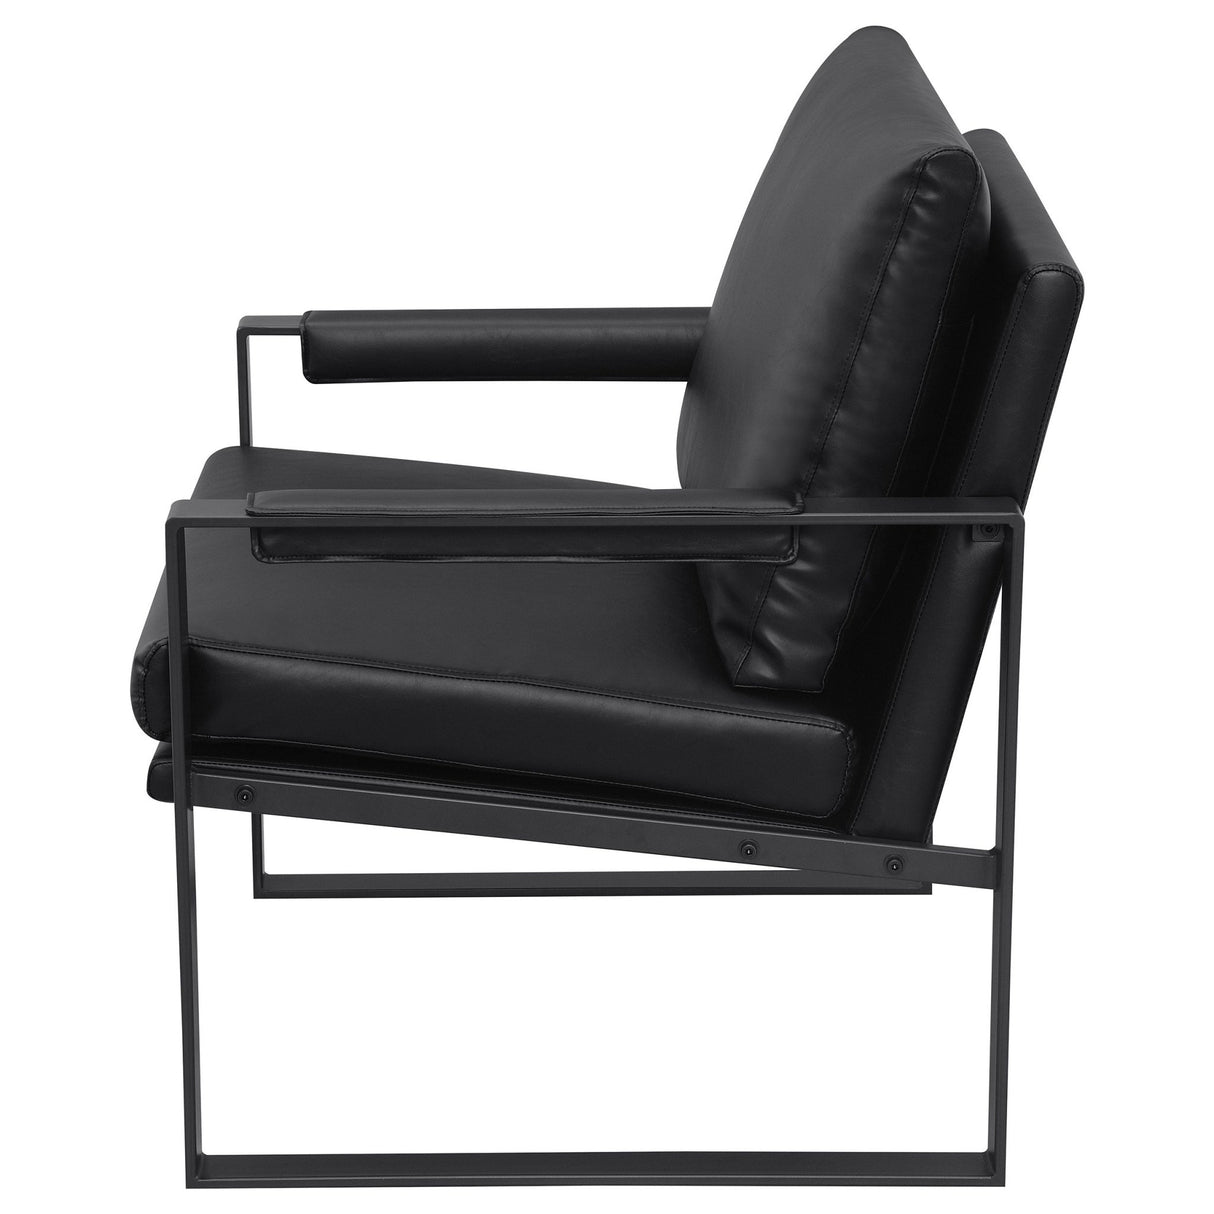 Accent Chair - Rosalind Upholstered Track Arms Accent Chair Black and Gummetal - Accent Chairs - 903021 - image - 4